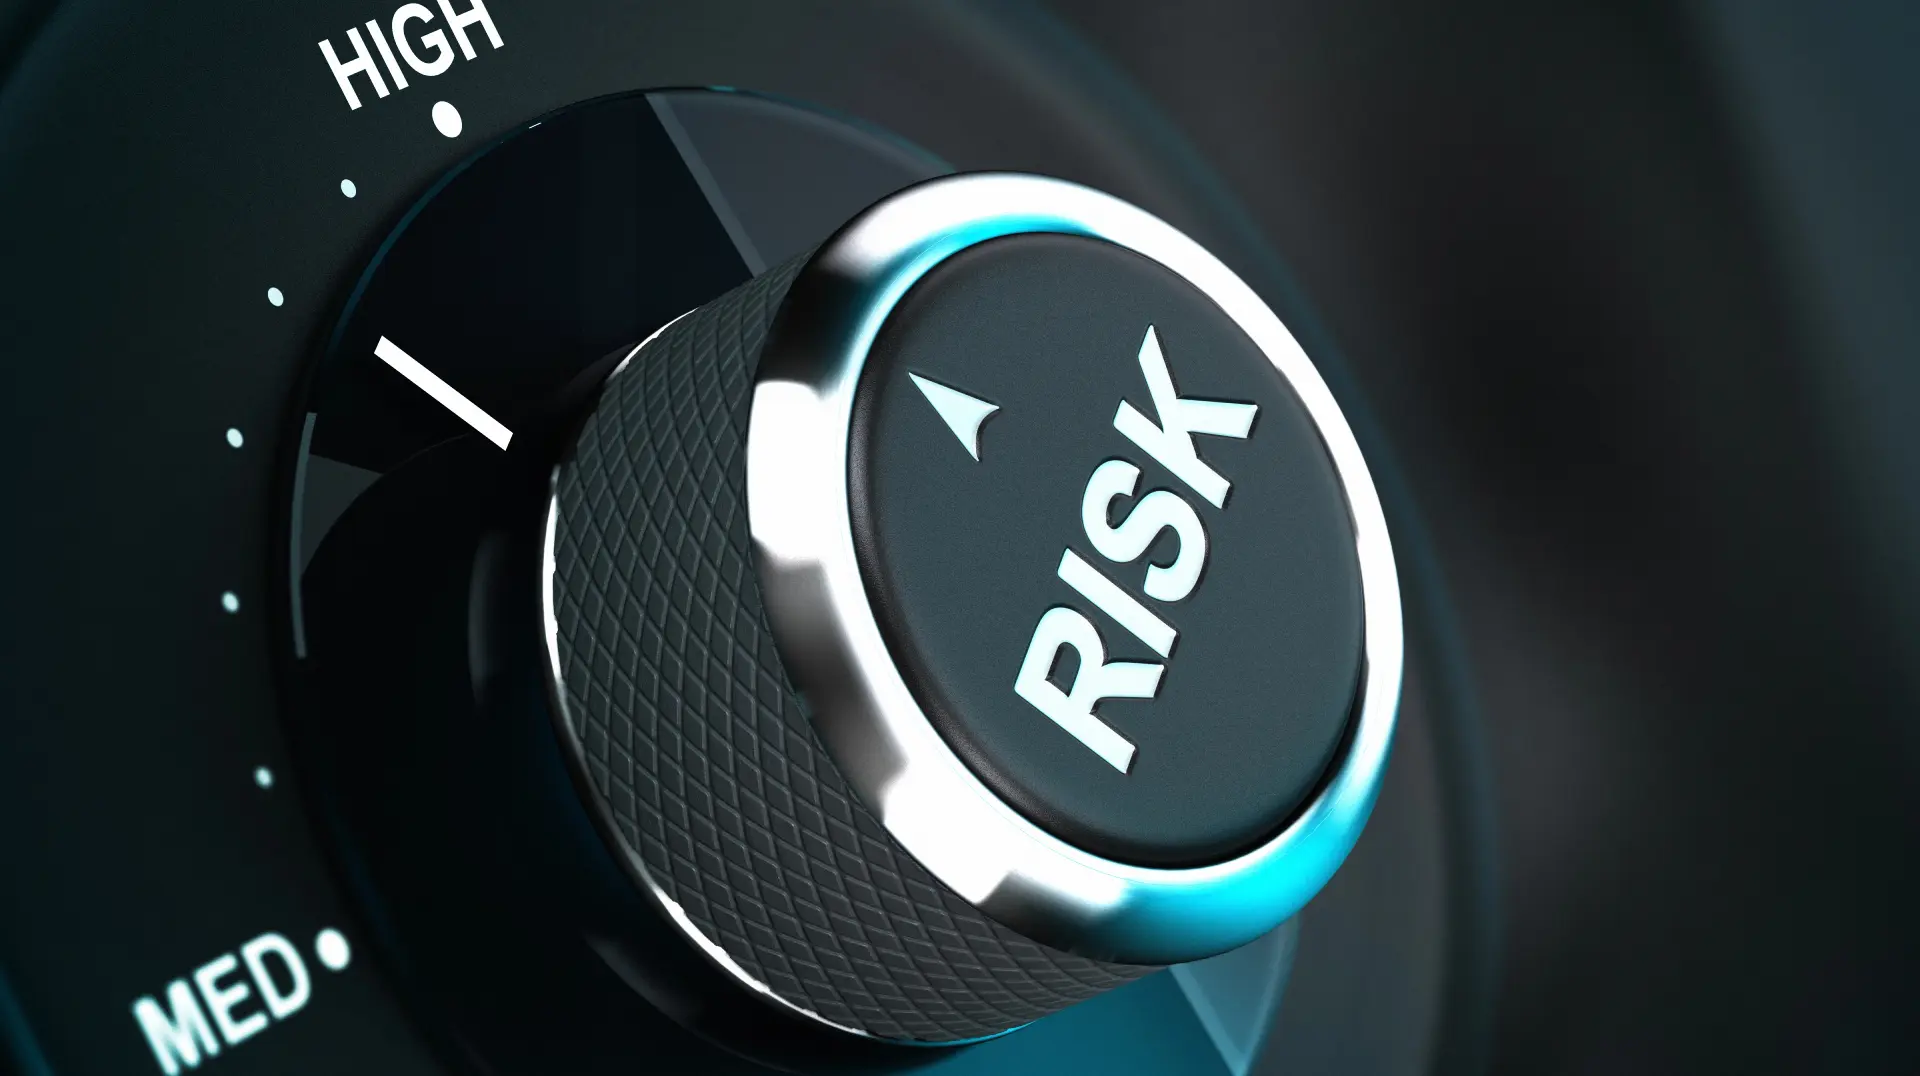 A close up of the " risk " button on an electronic device.